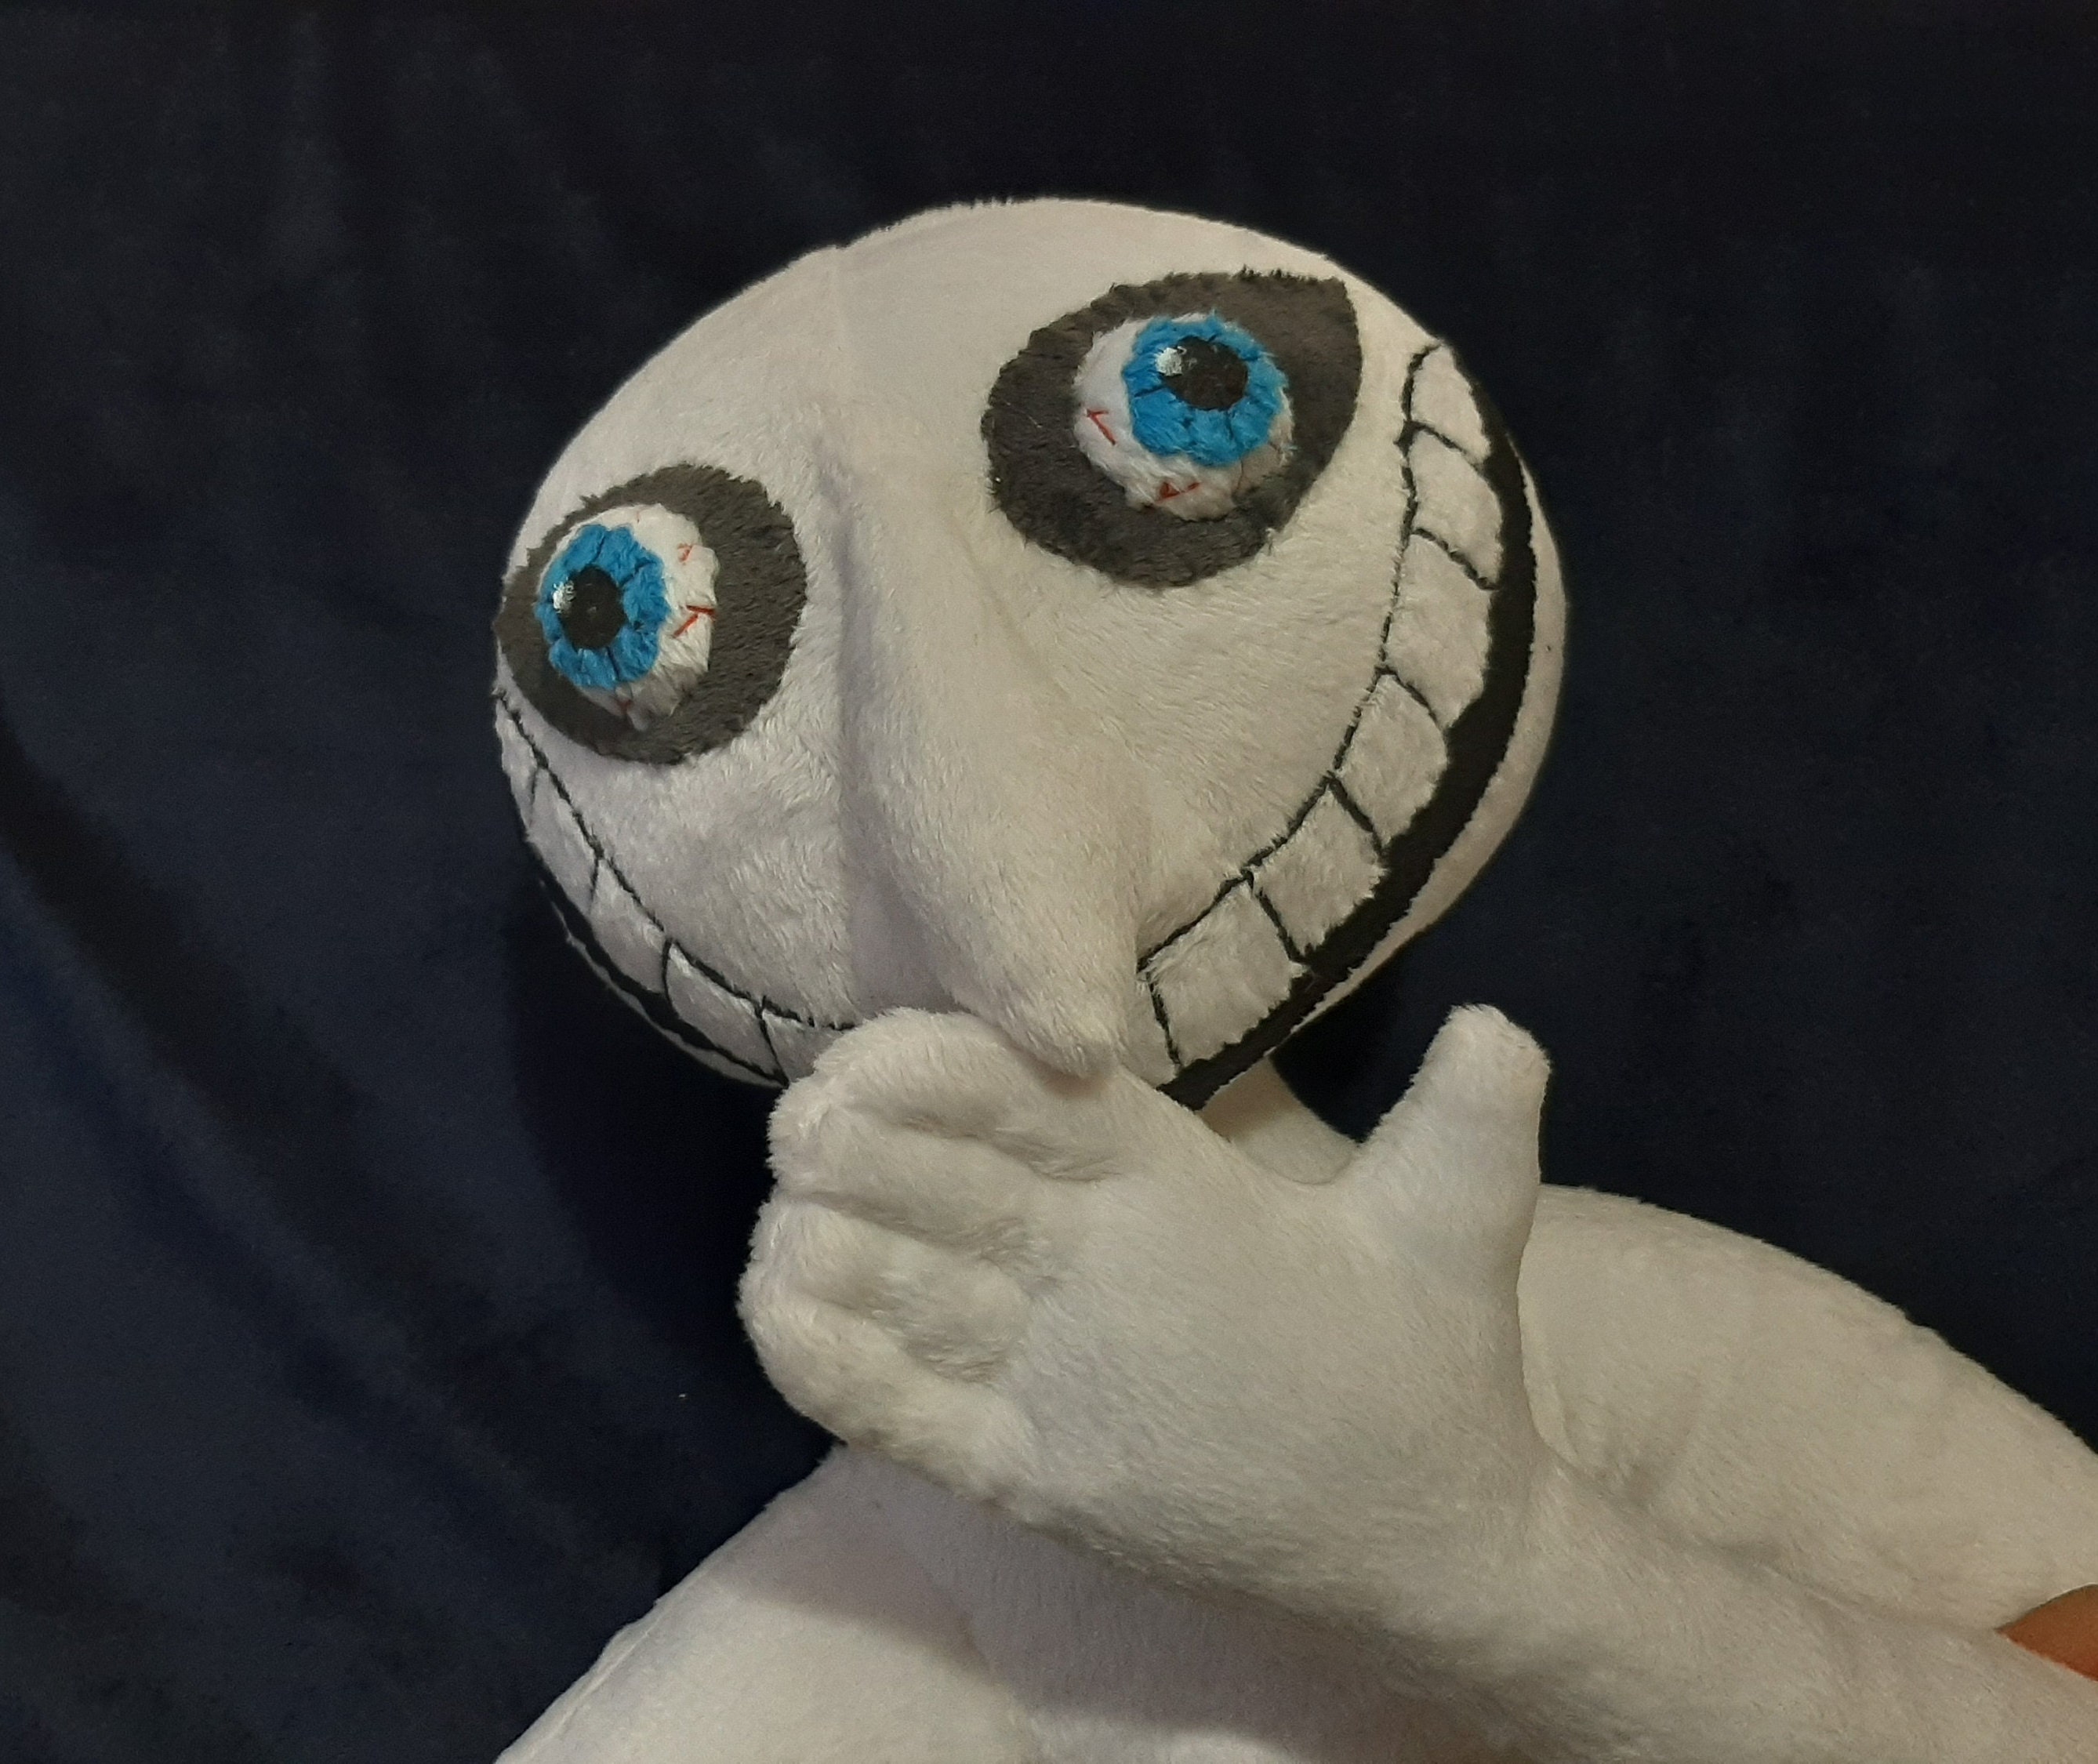 The Man From the Window 26,8 62 Cm Premium Plush Toy the Man